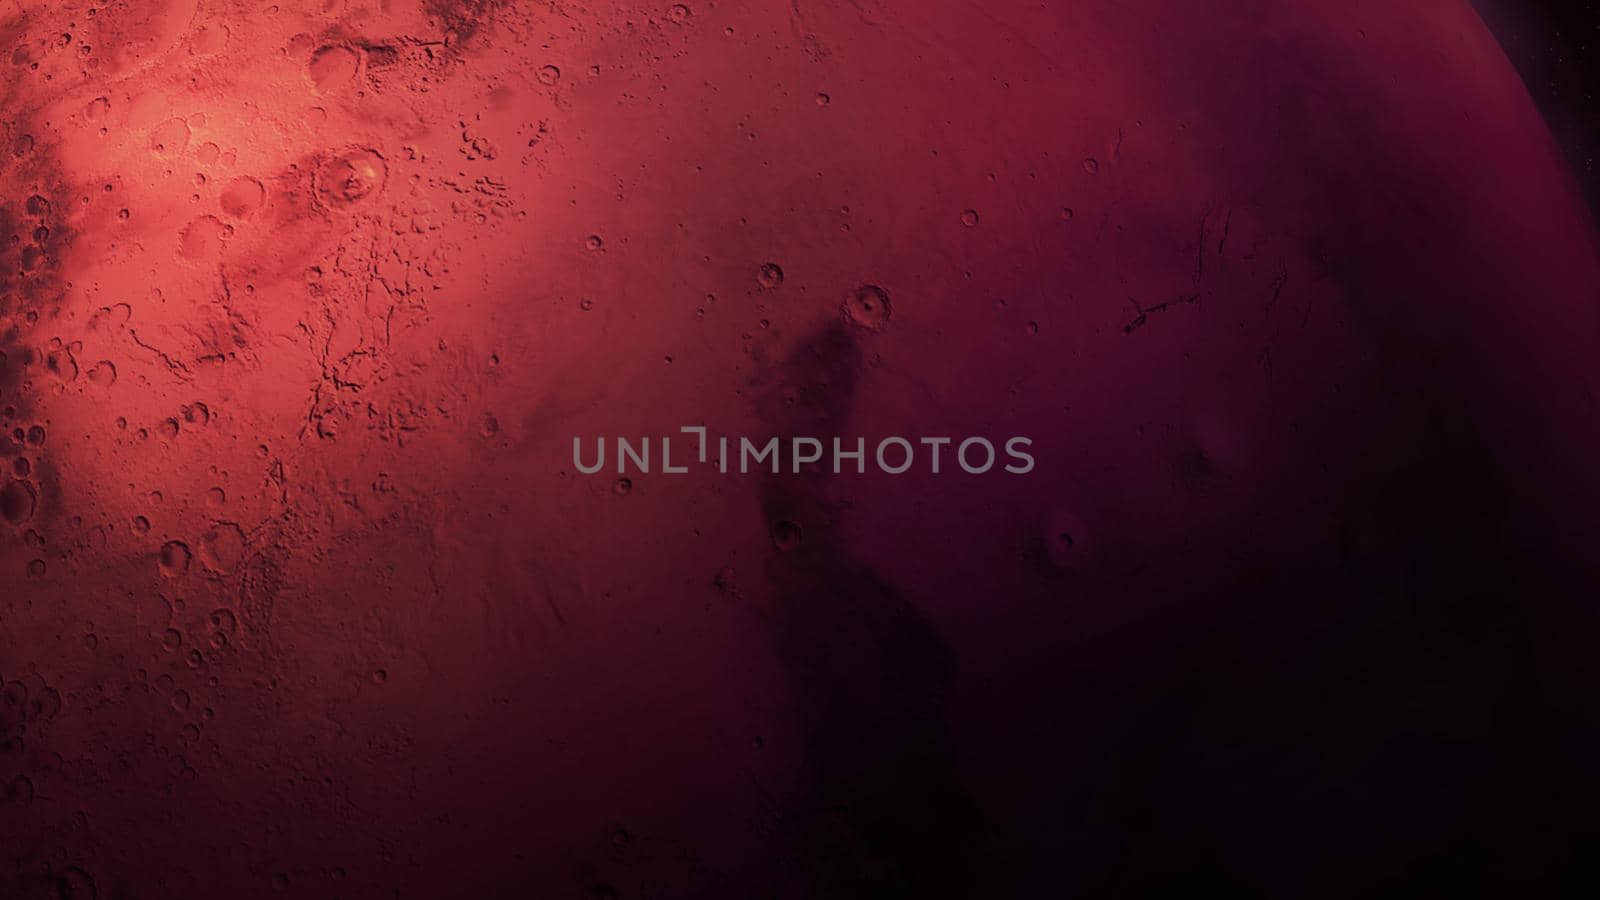 A close-up of the red planet Mars. 3D render by ConceptCafe